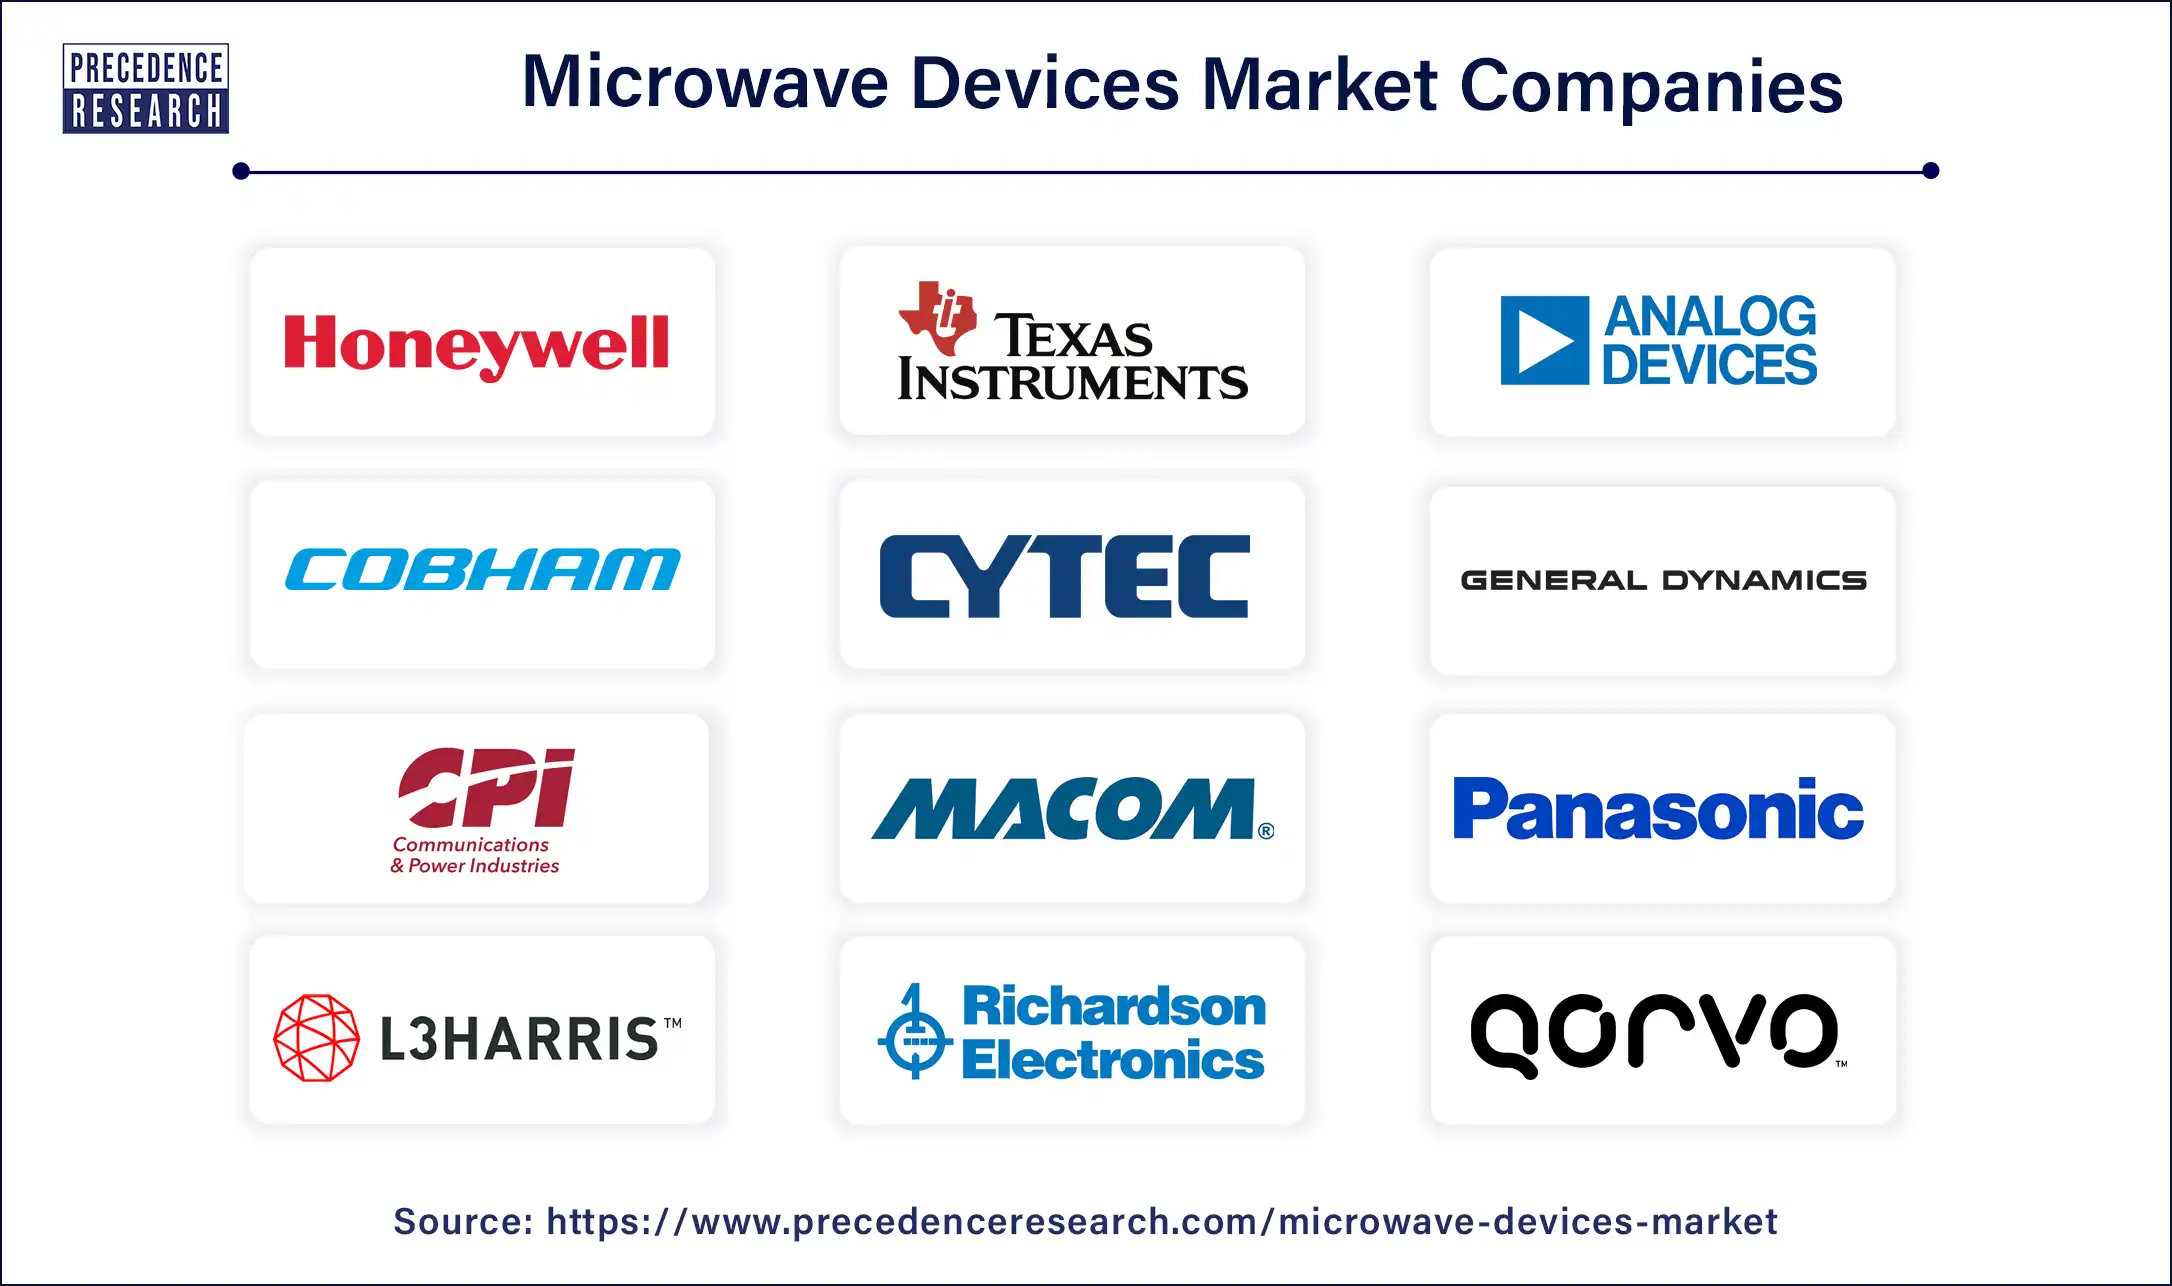 Microwave Devices Companies